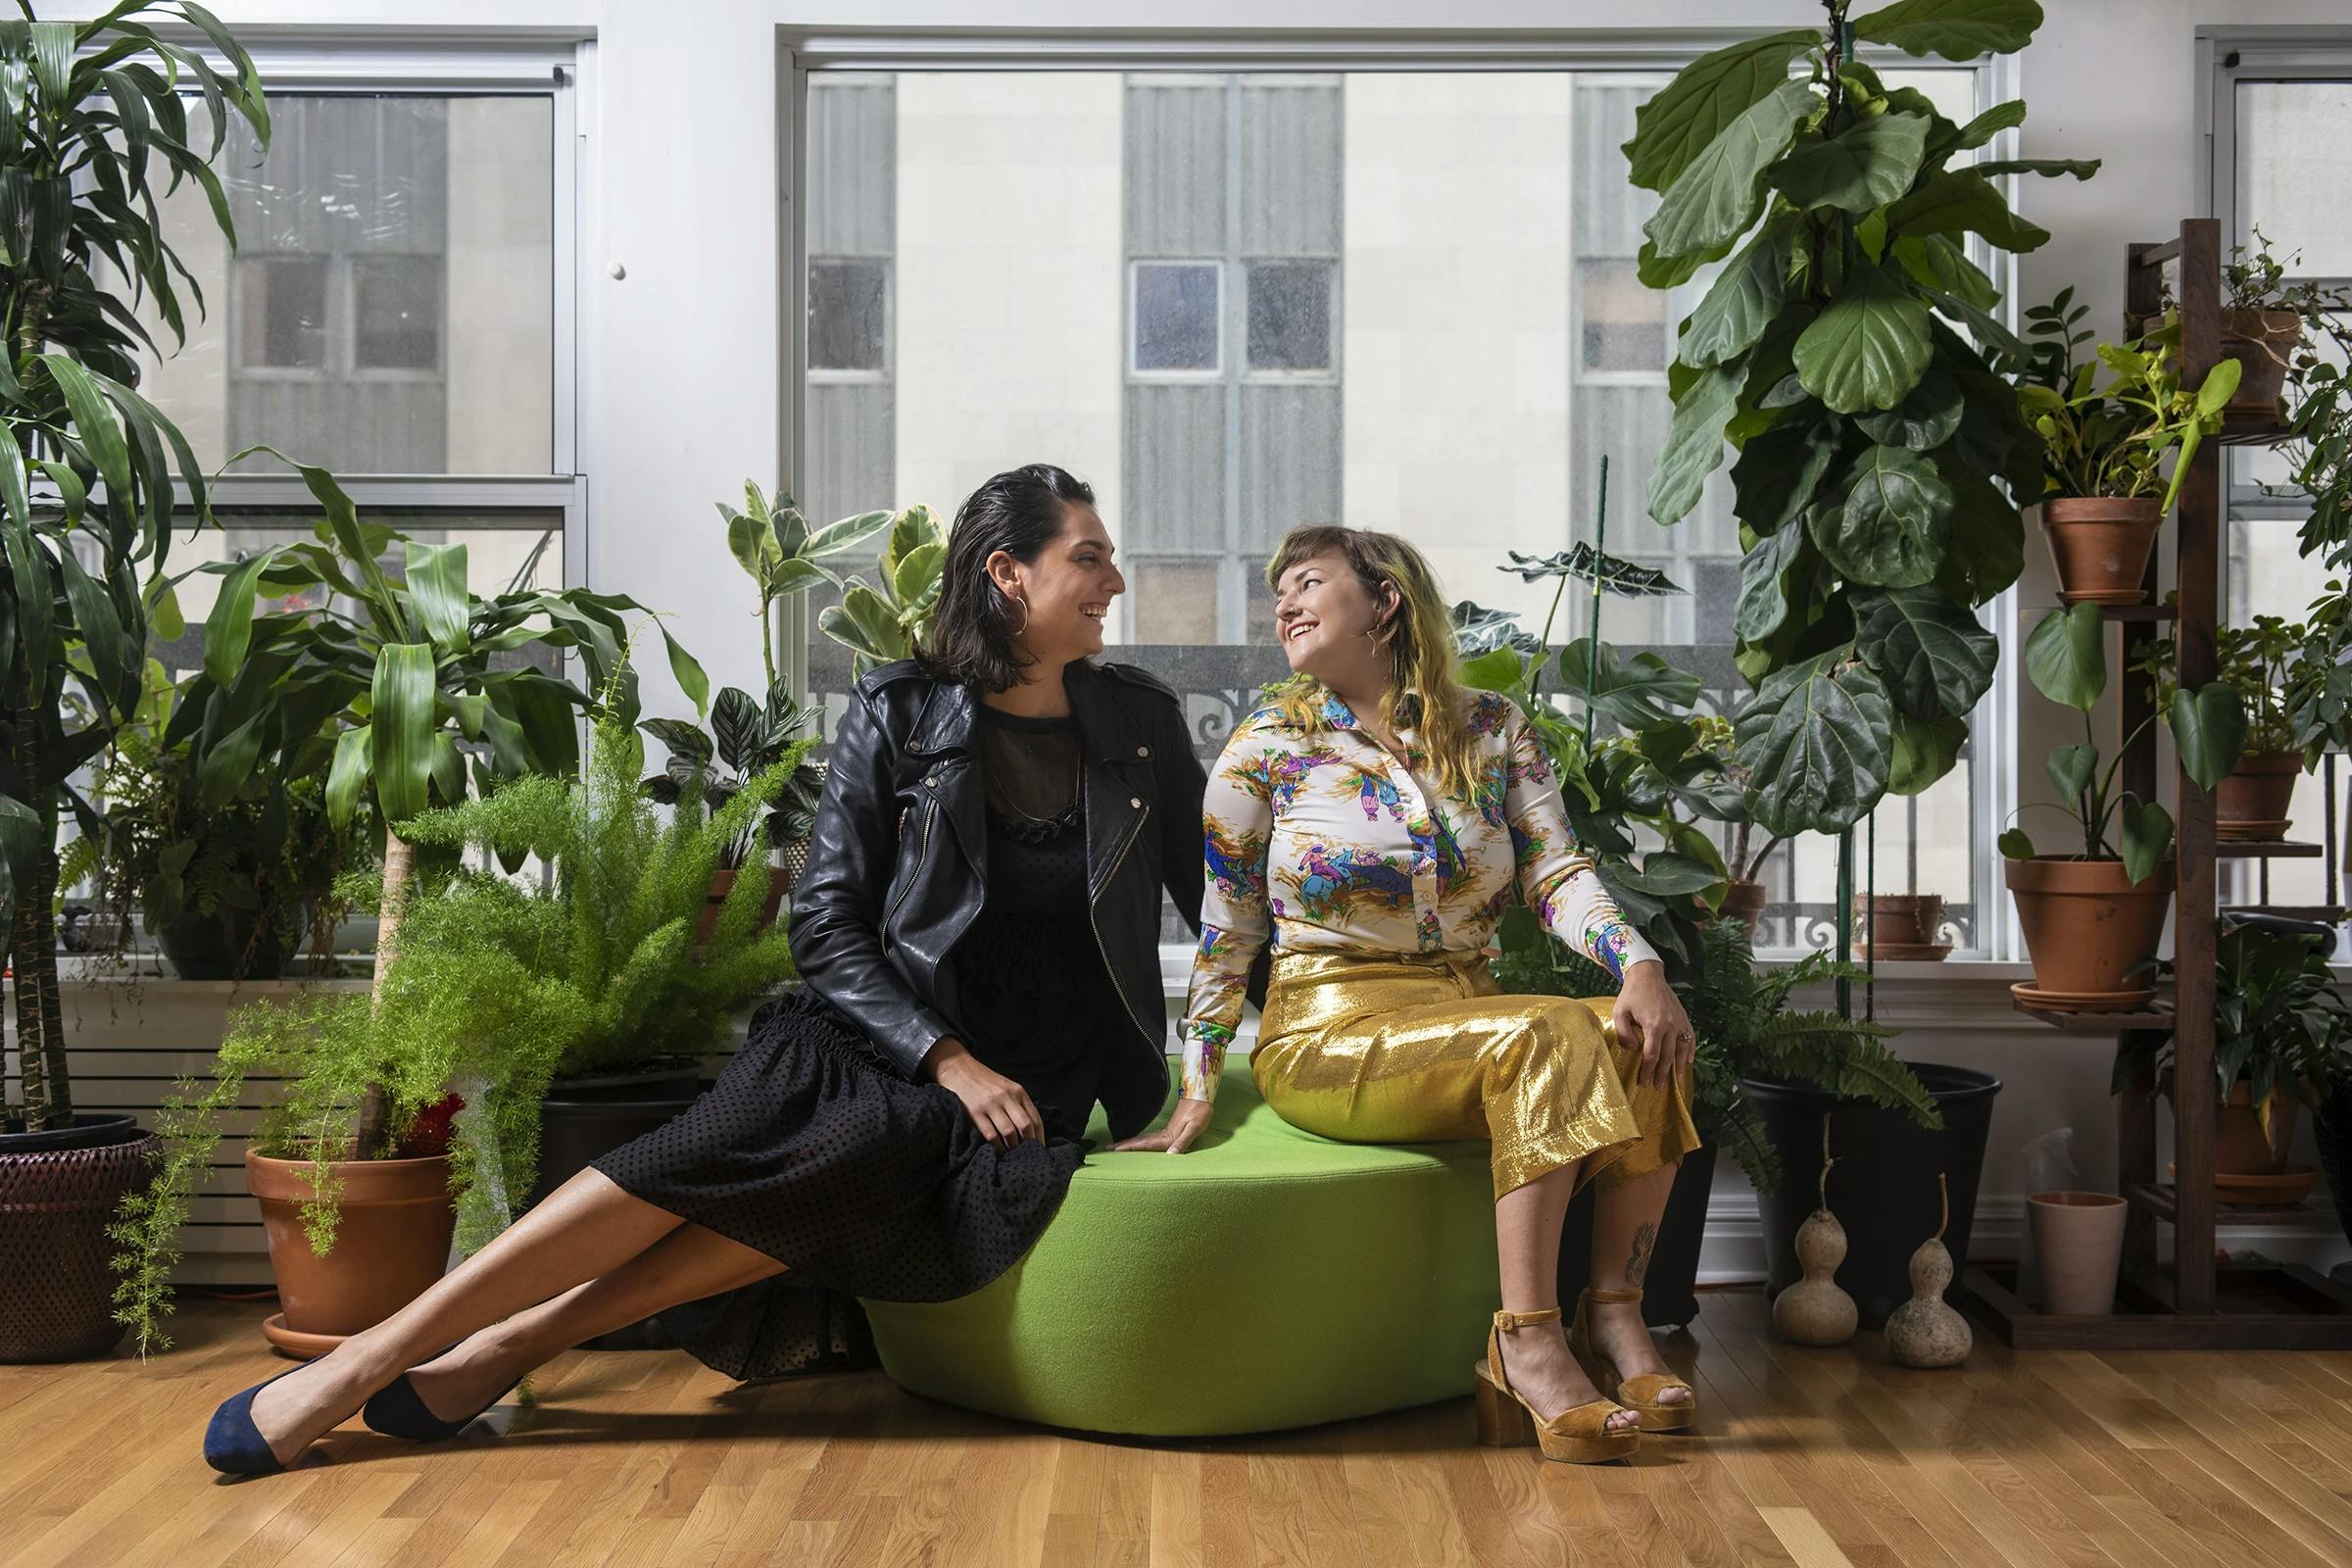 Lauren Hirshfield and Kat Ryals of PARADICE PALASE sitting side-by-side on a green chair, surrounded by multiple potted plants in an office with a large window.